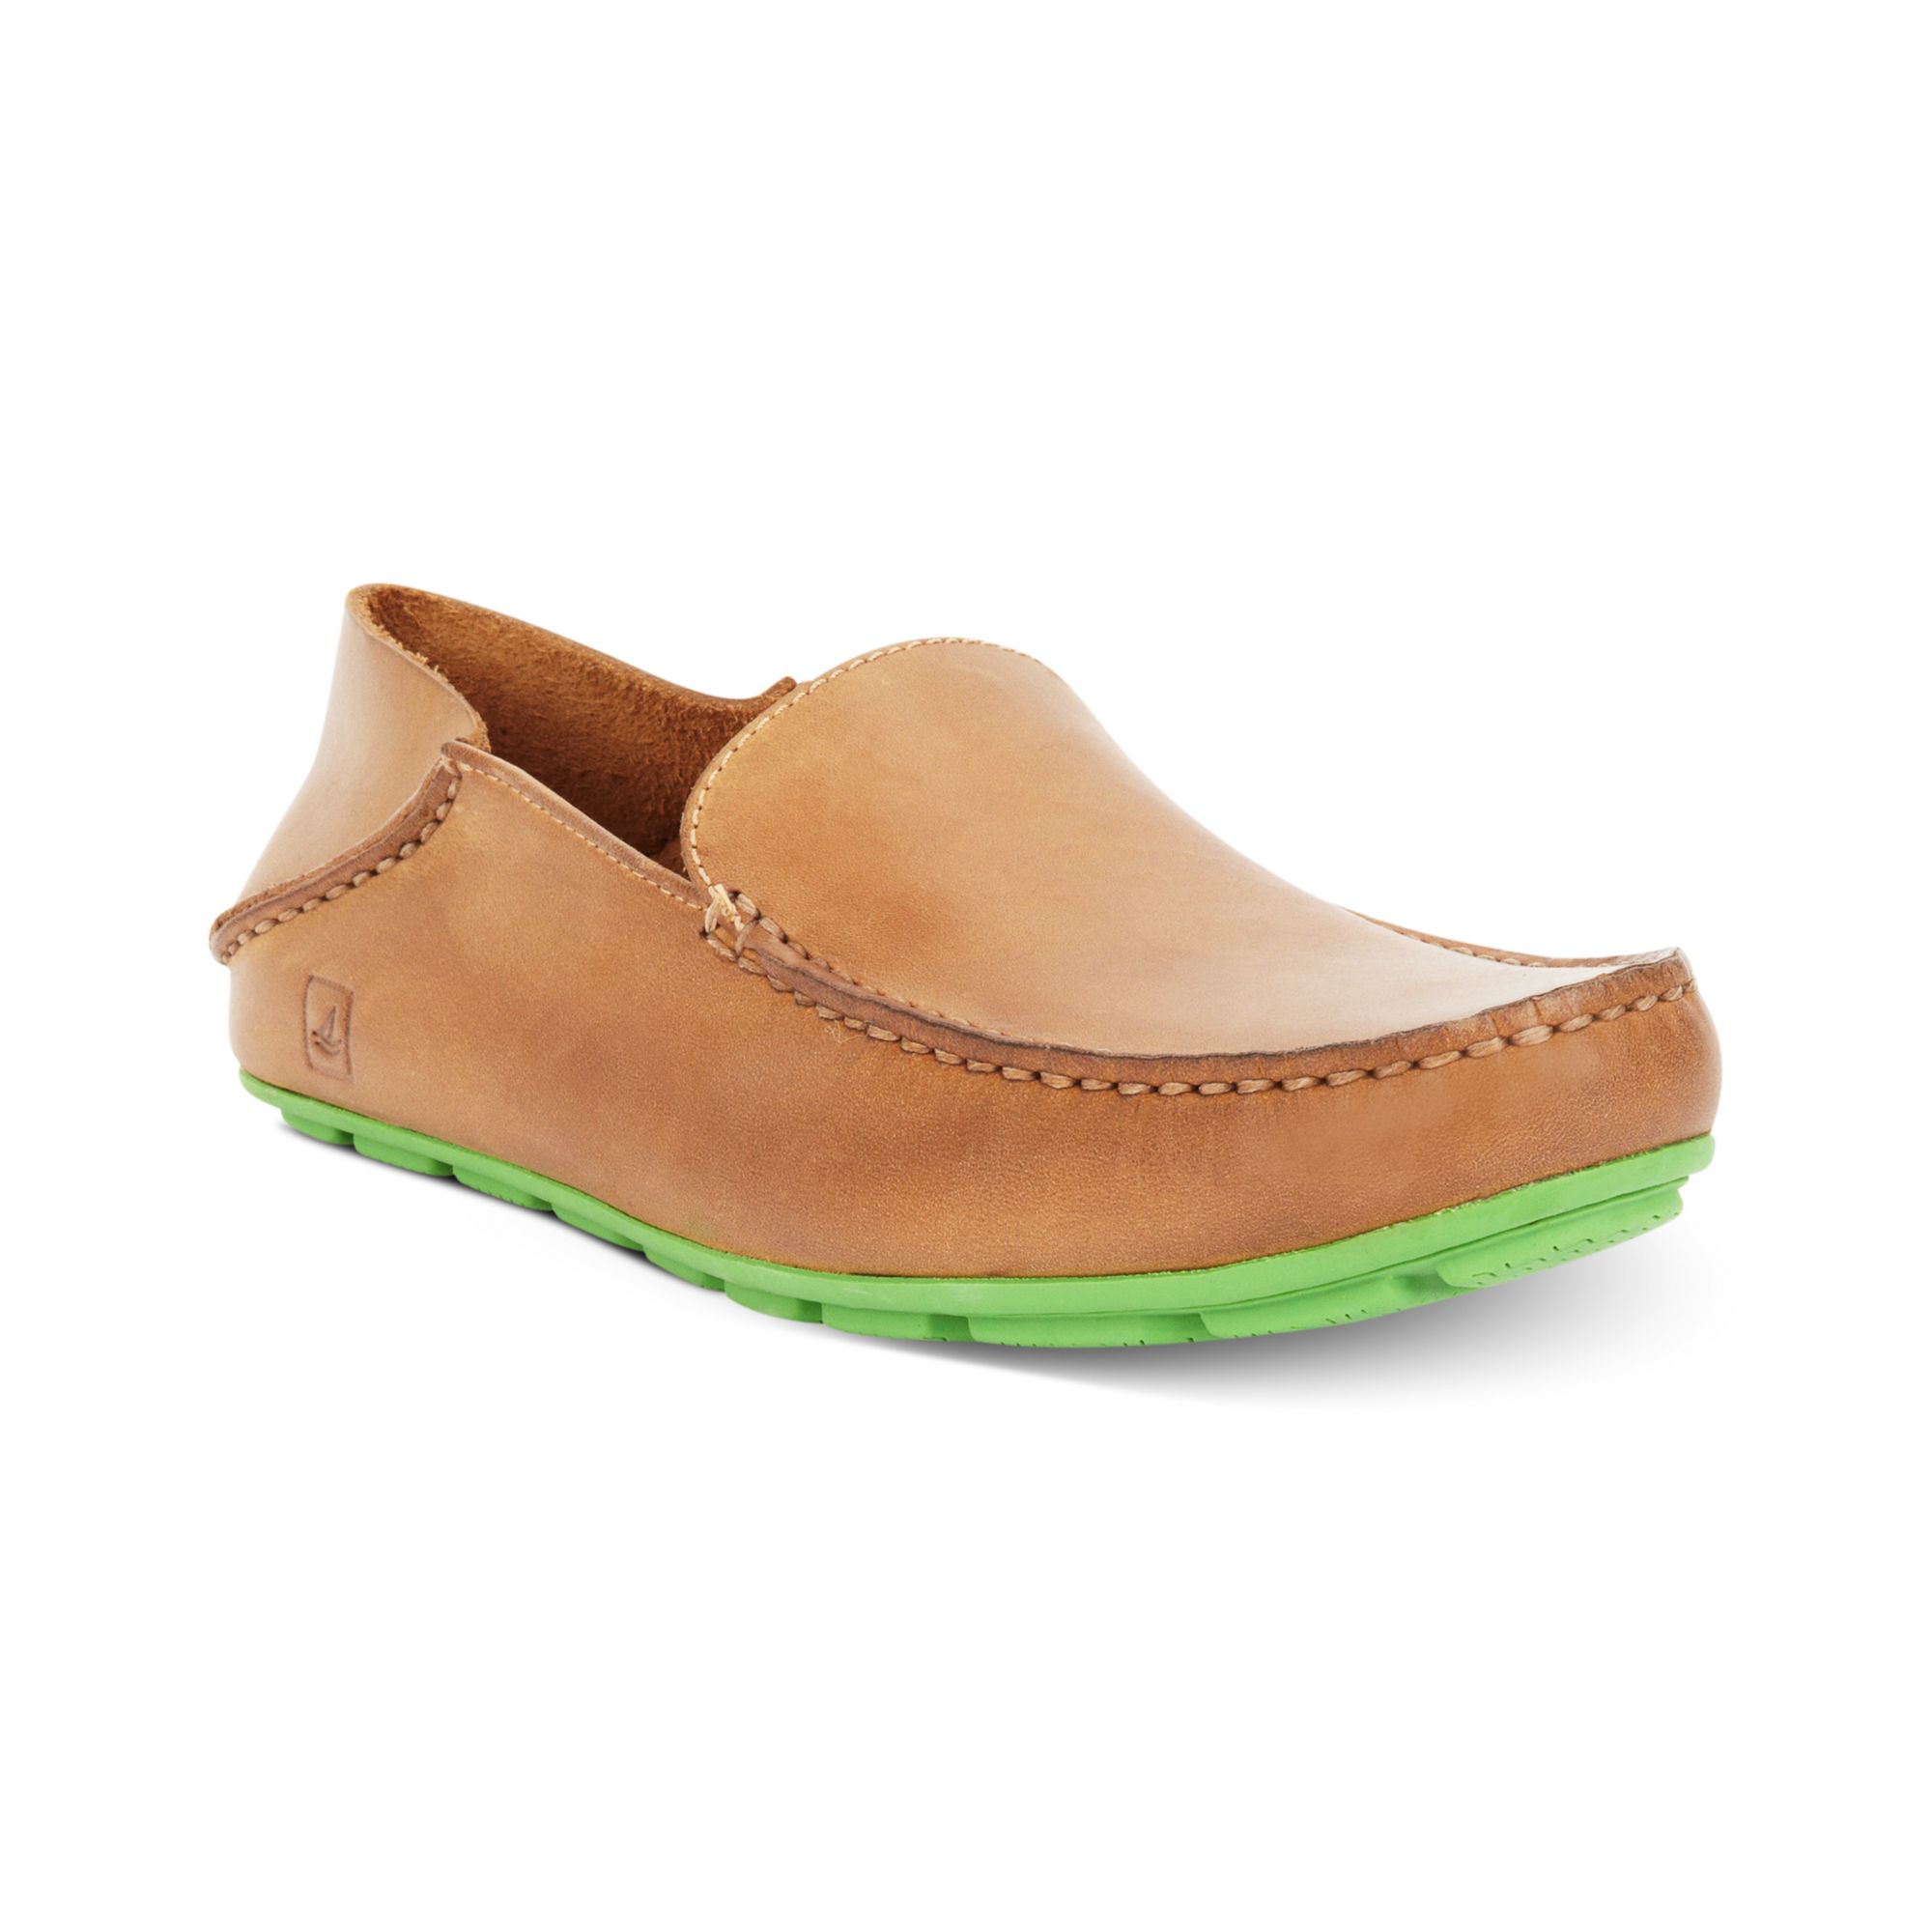 clarks top sider shoes